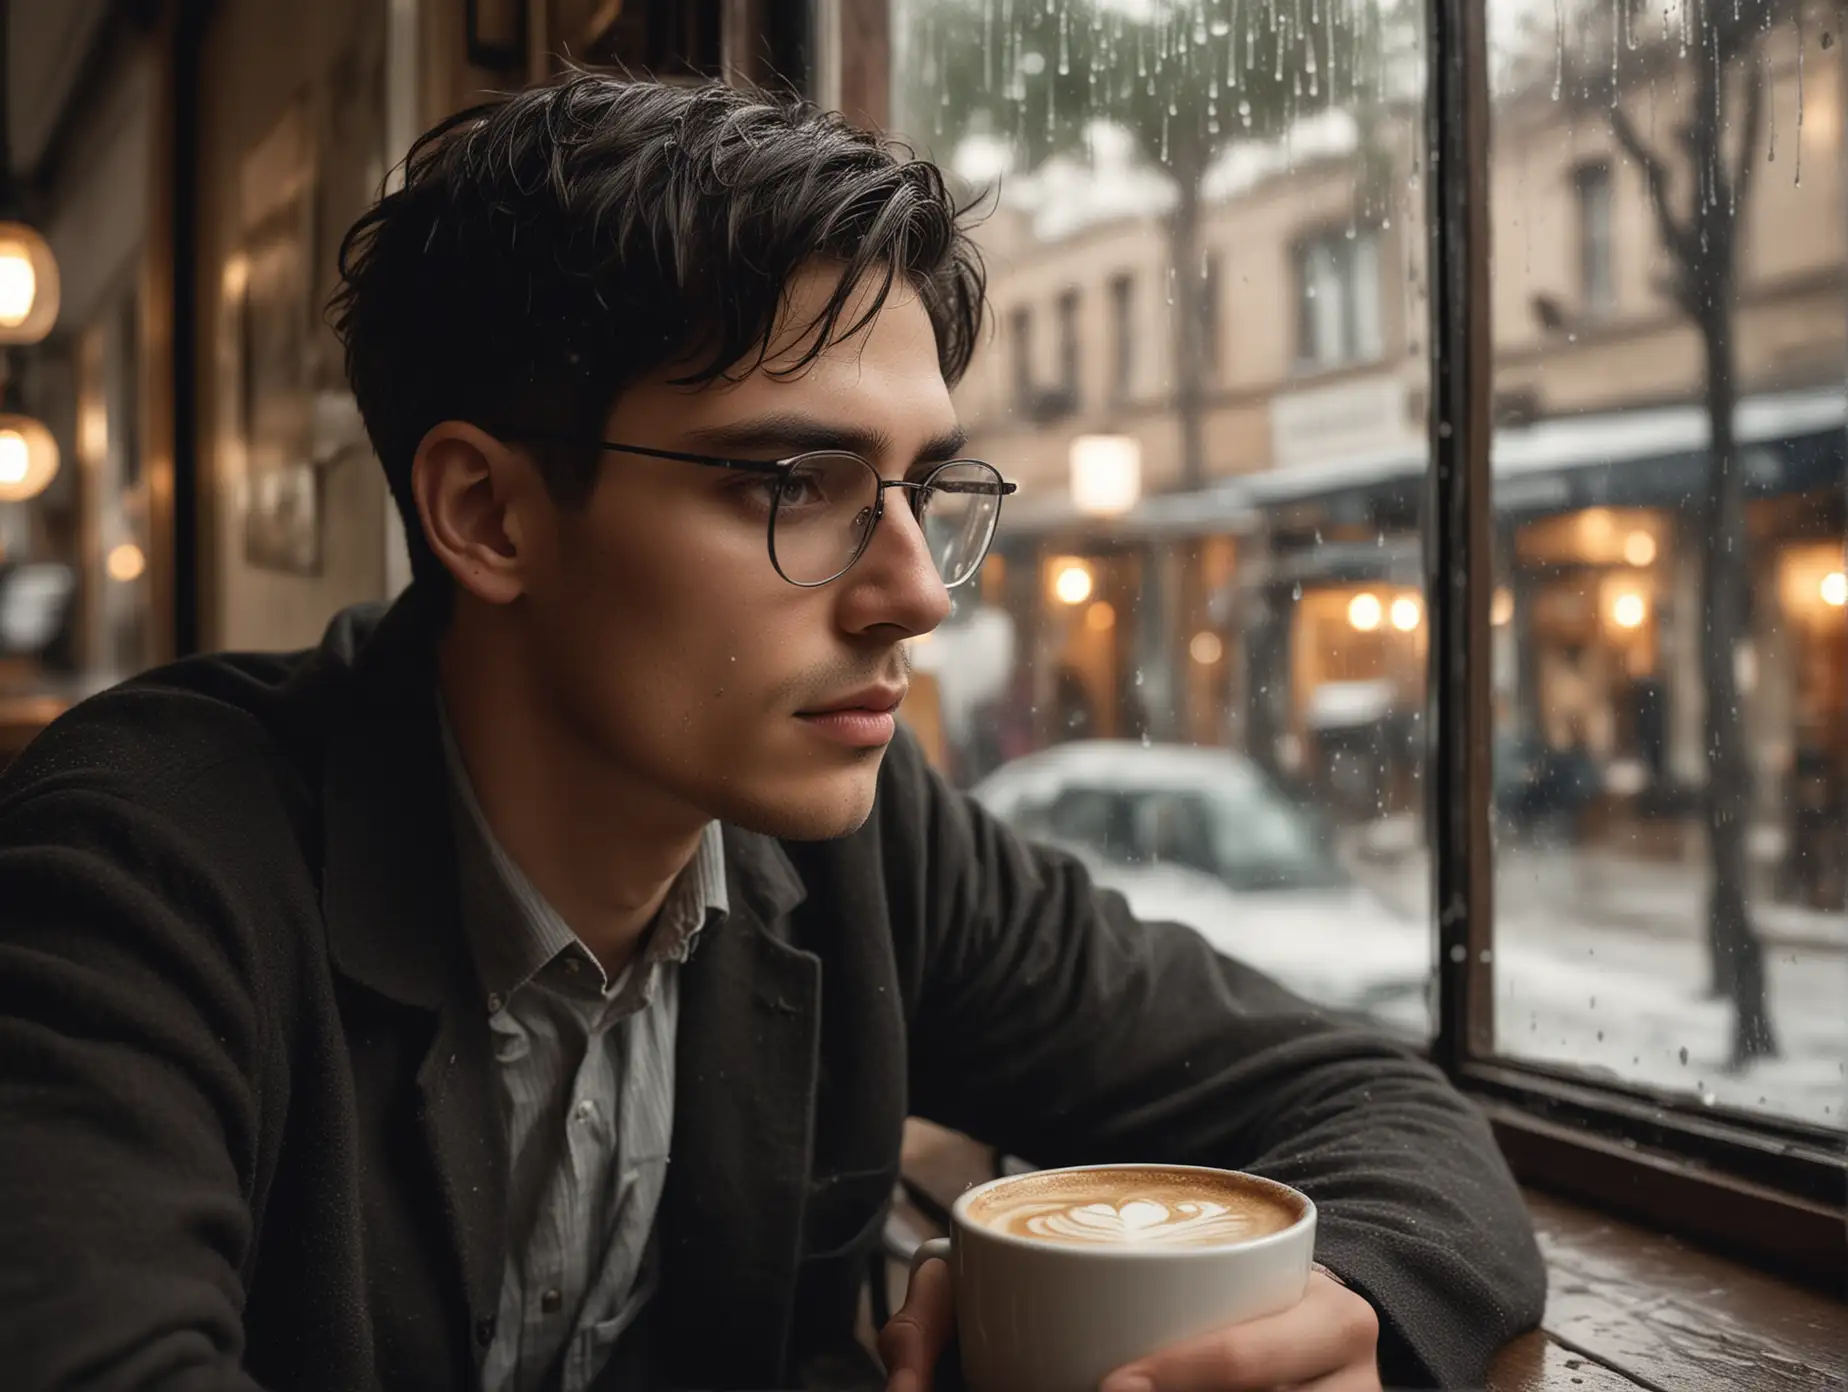 A young man with black buzz haircut, wears clear glasses, sits serenely in a cozy cafe, cradling a steaming cup of coffee latte. His eyes gaze thoughtfully out of the window, where raindrops cascade down the glass, creating a mesmerizing backdrop. The soft, diffused light of the cafe illuminates his features, casting gentle shadows that accentuate his contemplative expression. The atmosphere is one of quiet introspection, captured in the iconic style of Annie Leibovitz, where every detail tells a story and evokes emotion.